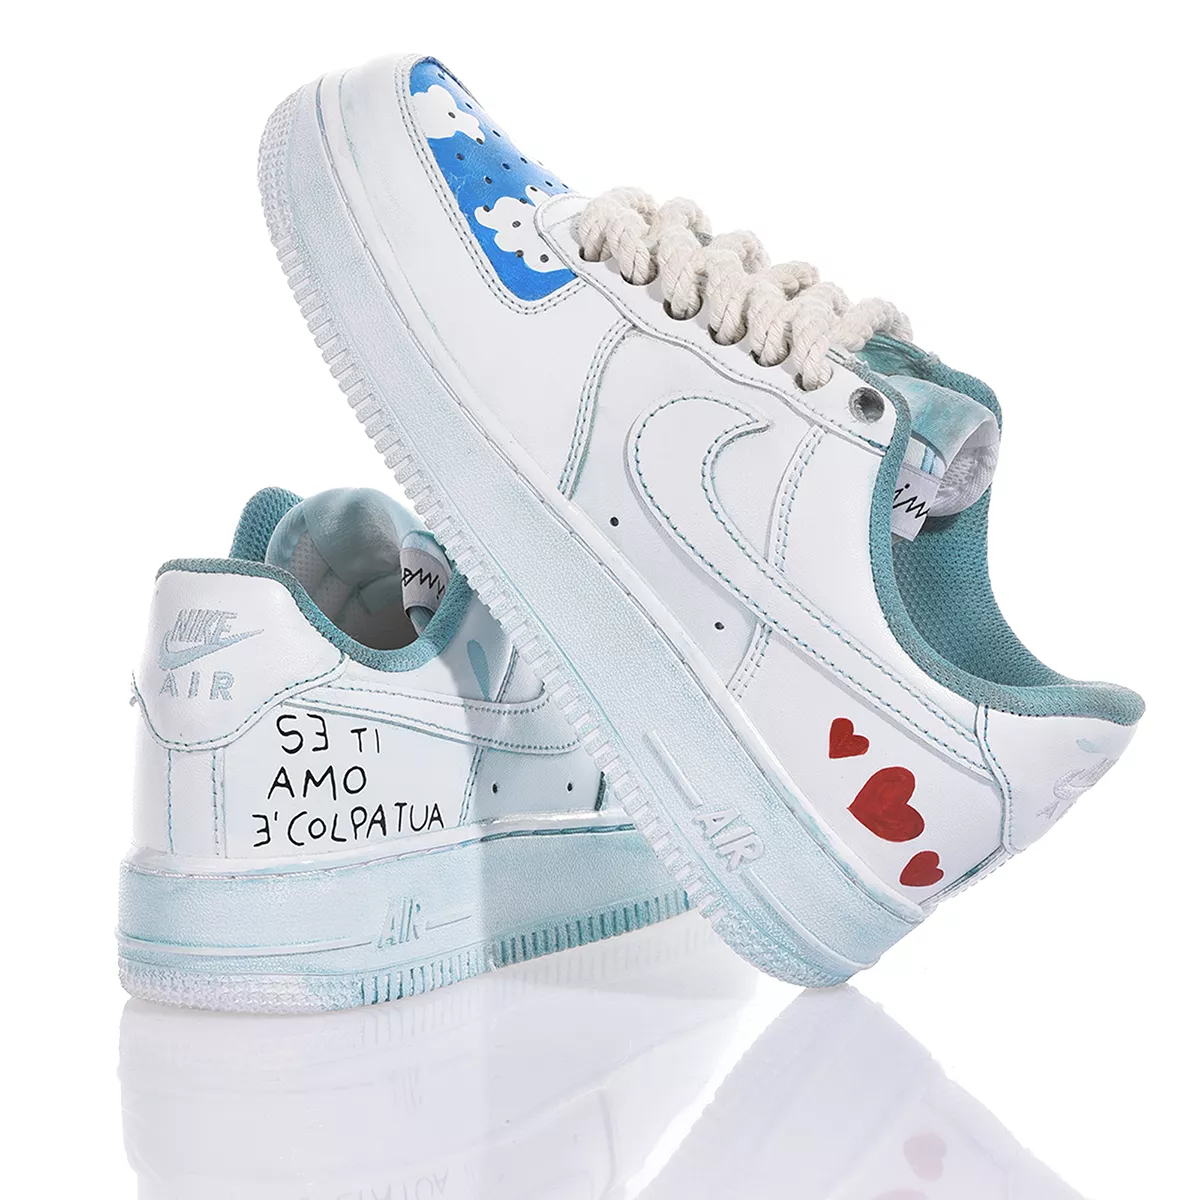 Nike Air Force 1 Testa di Chezzo Air Force 1 Used-Waschung